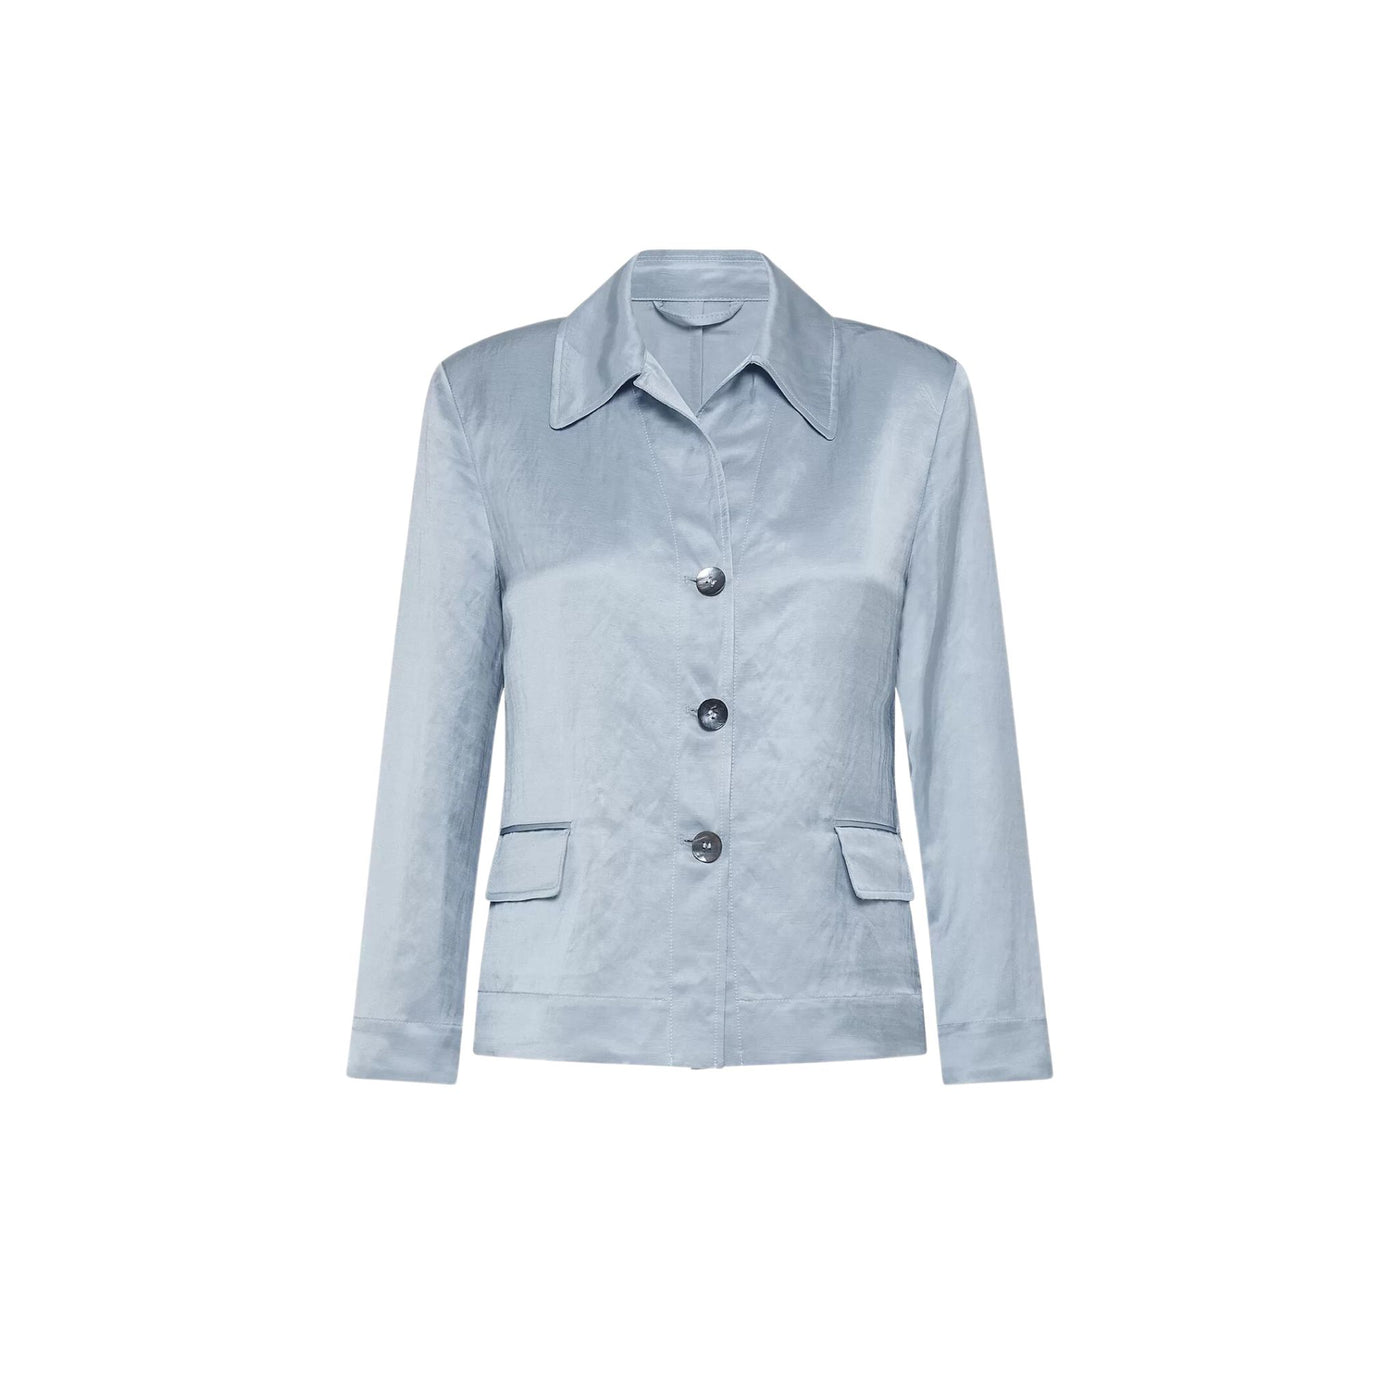 Women's jacket with three button closure